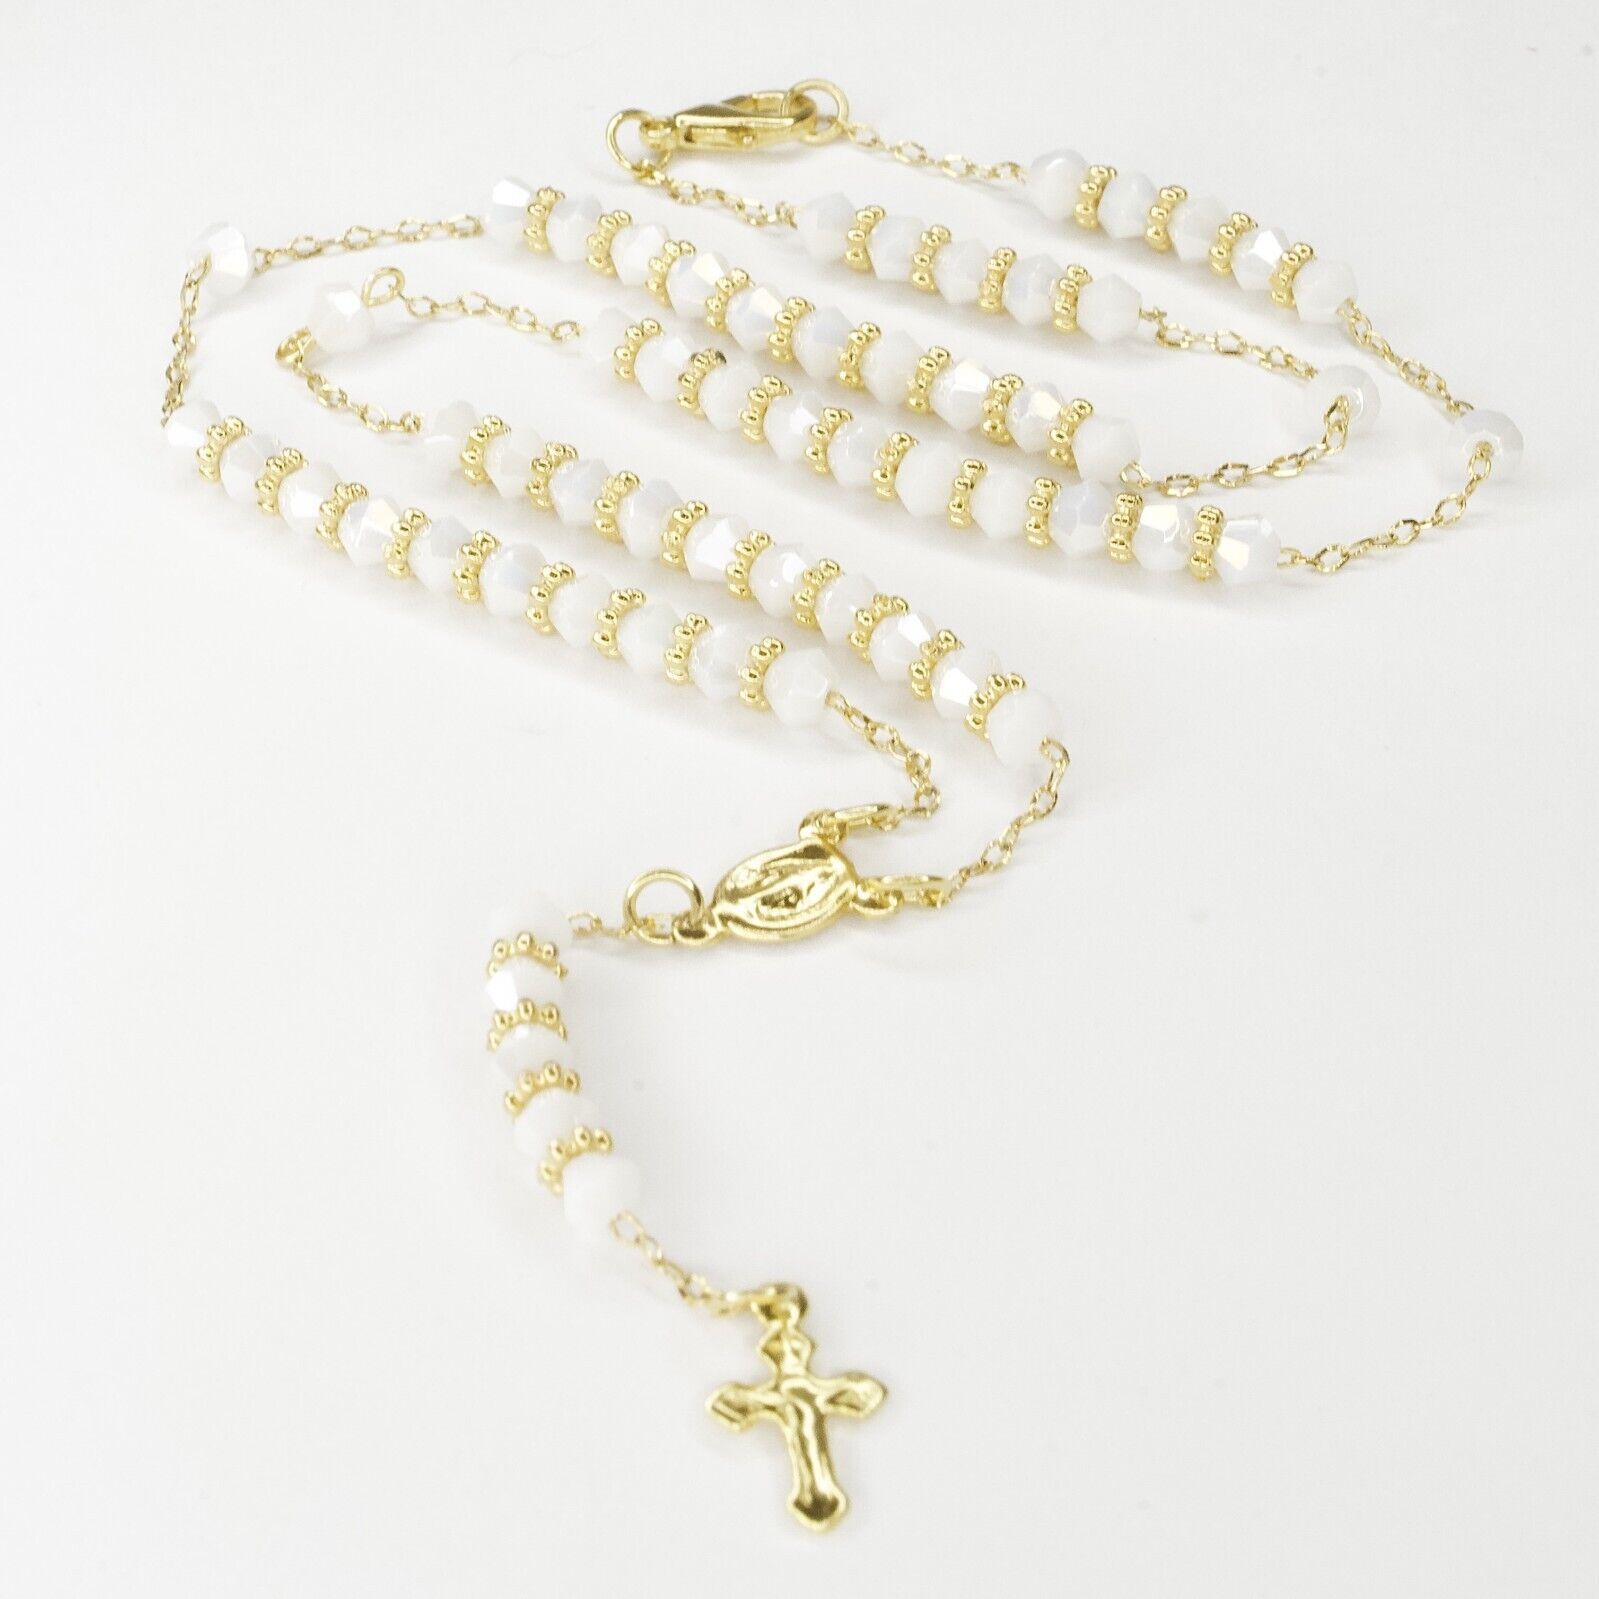 Rosary White Beads Necklace Gold Plated Blessed by Pope for Women